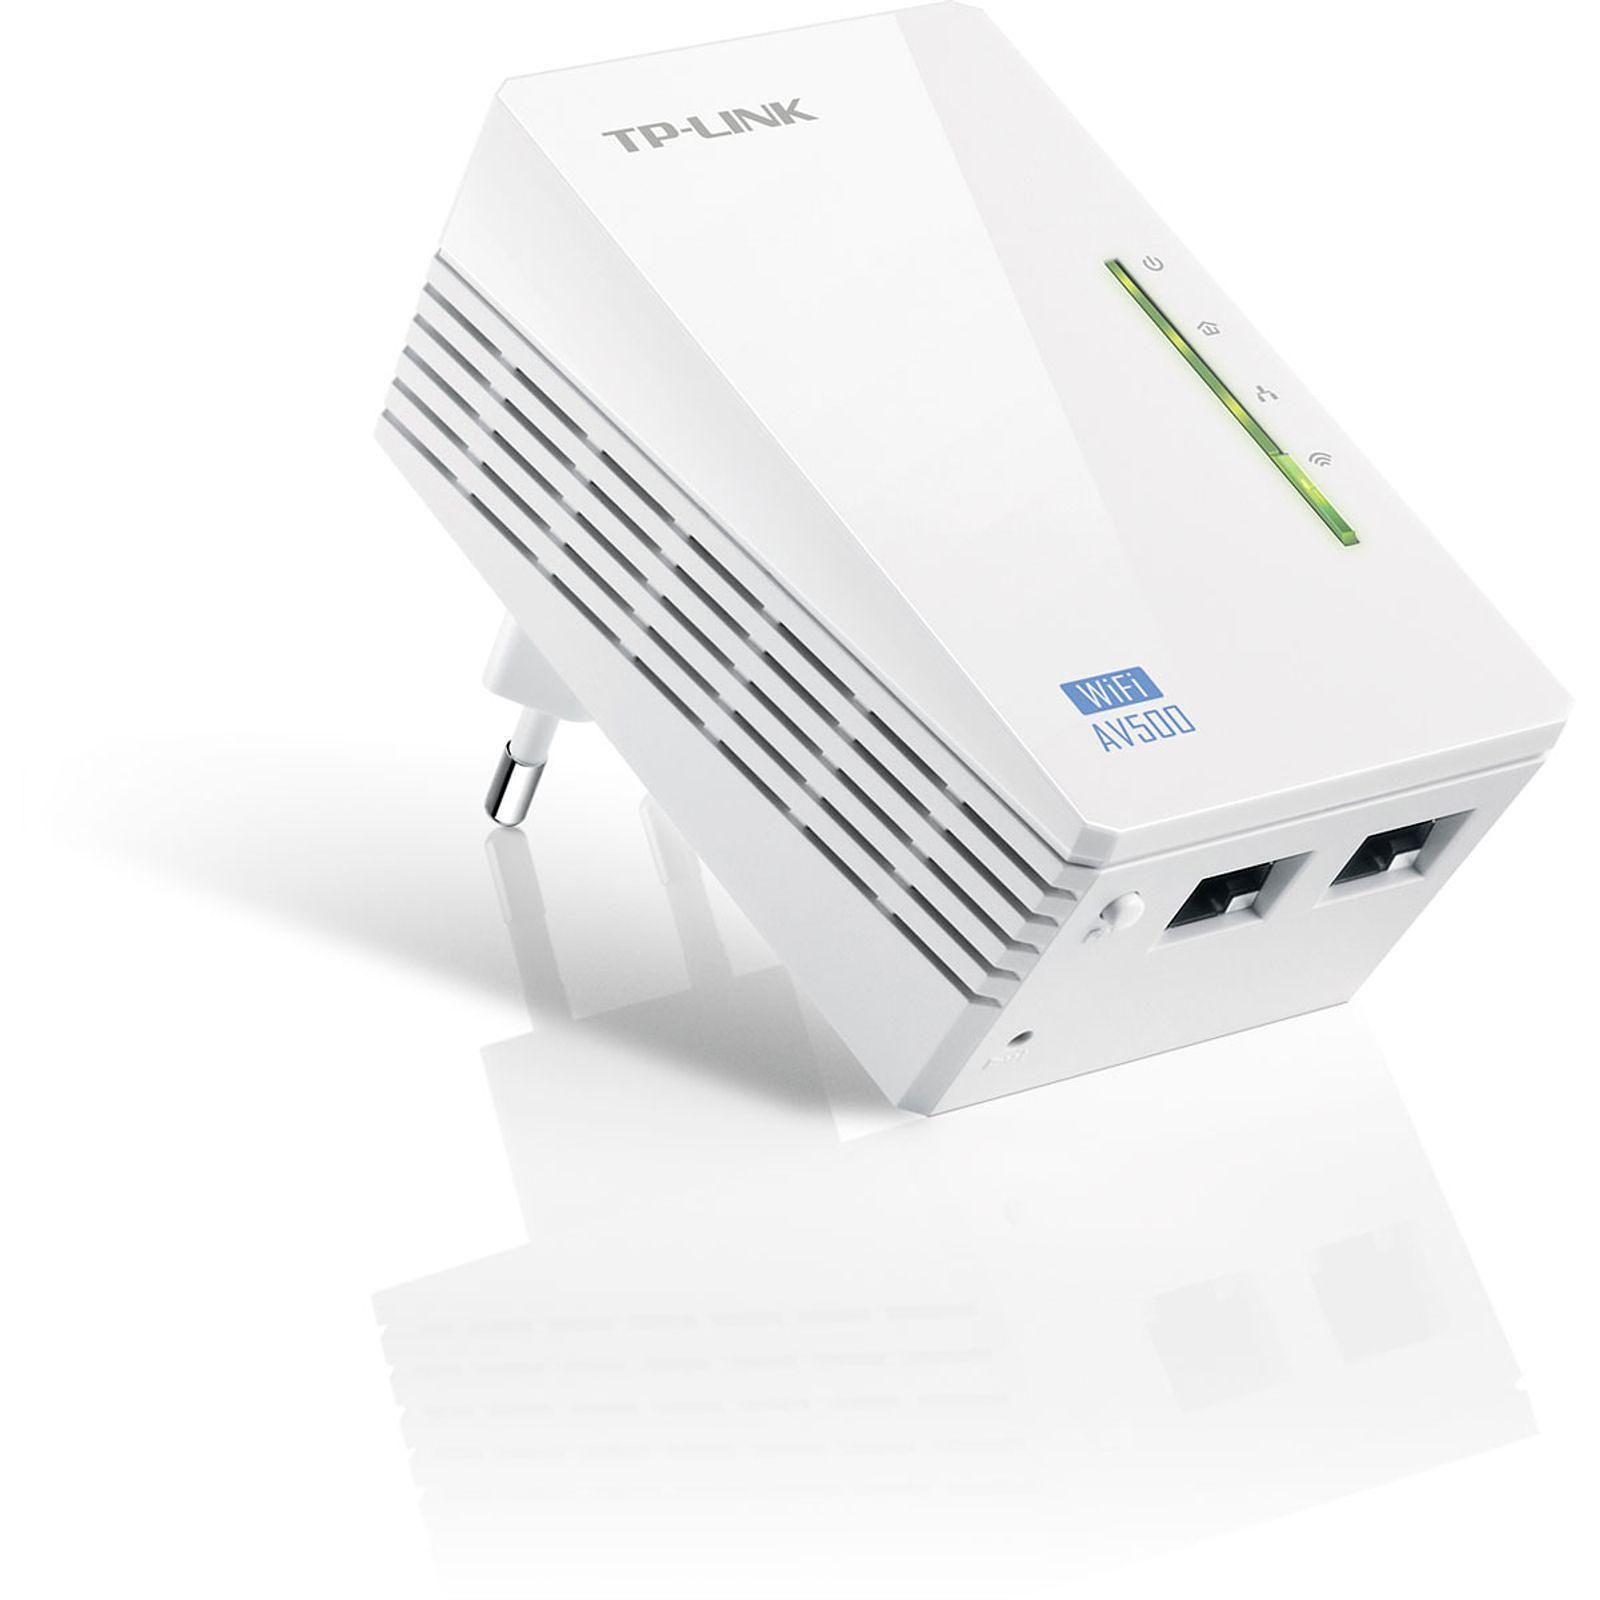 TP-Link TL-WPA4220 WiFi Extender CPL 500Mbps/WiFi 300Mbps - Adaptateur CPL - 2